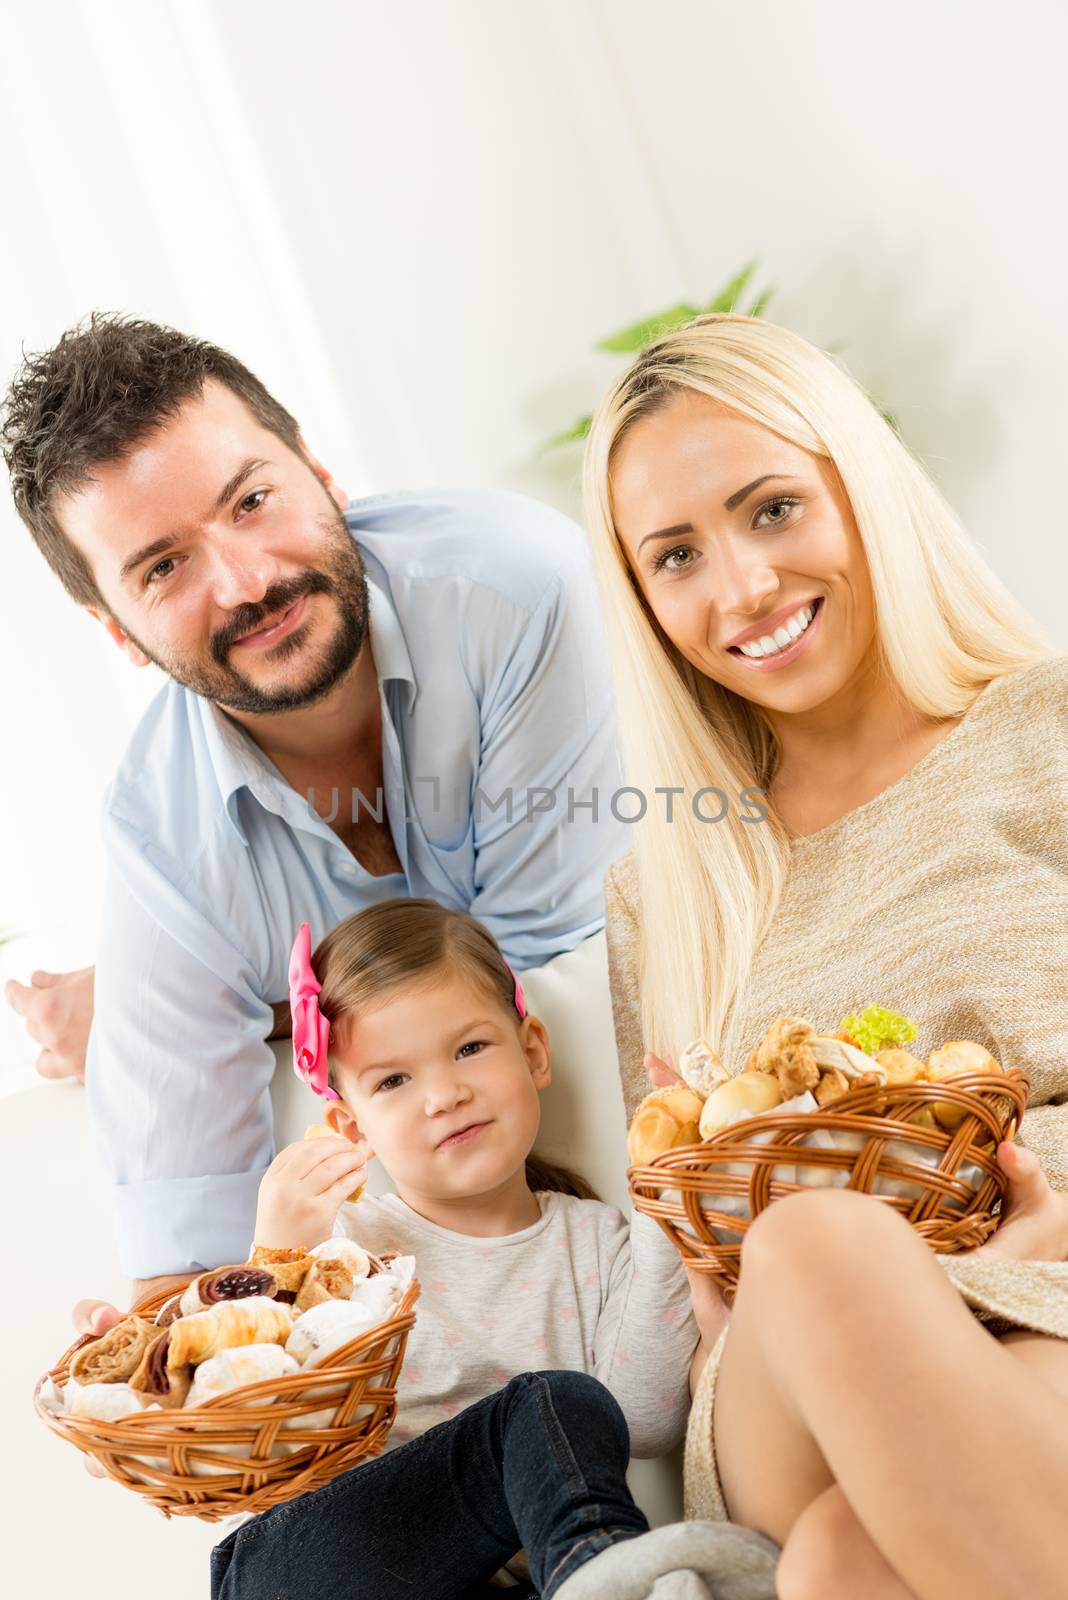 Young parents hold in their hands woven basket with delicious salty and sweet pastries. Beside them sit on the couch their little daughter eating pastries.